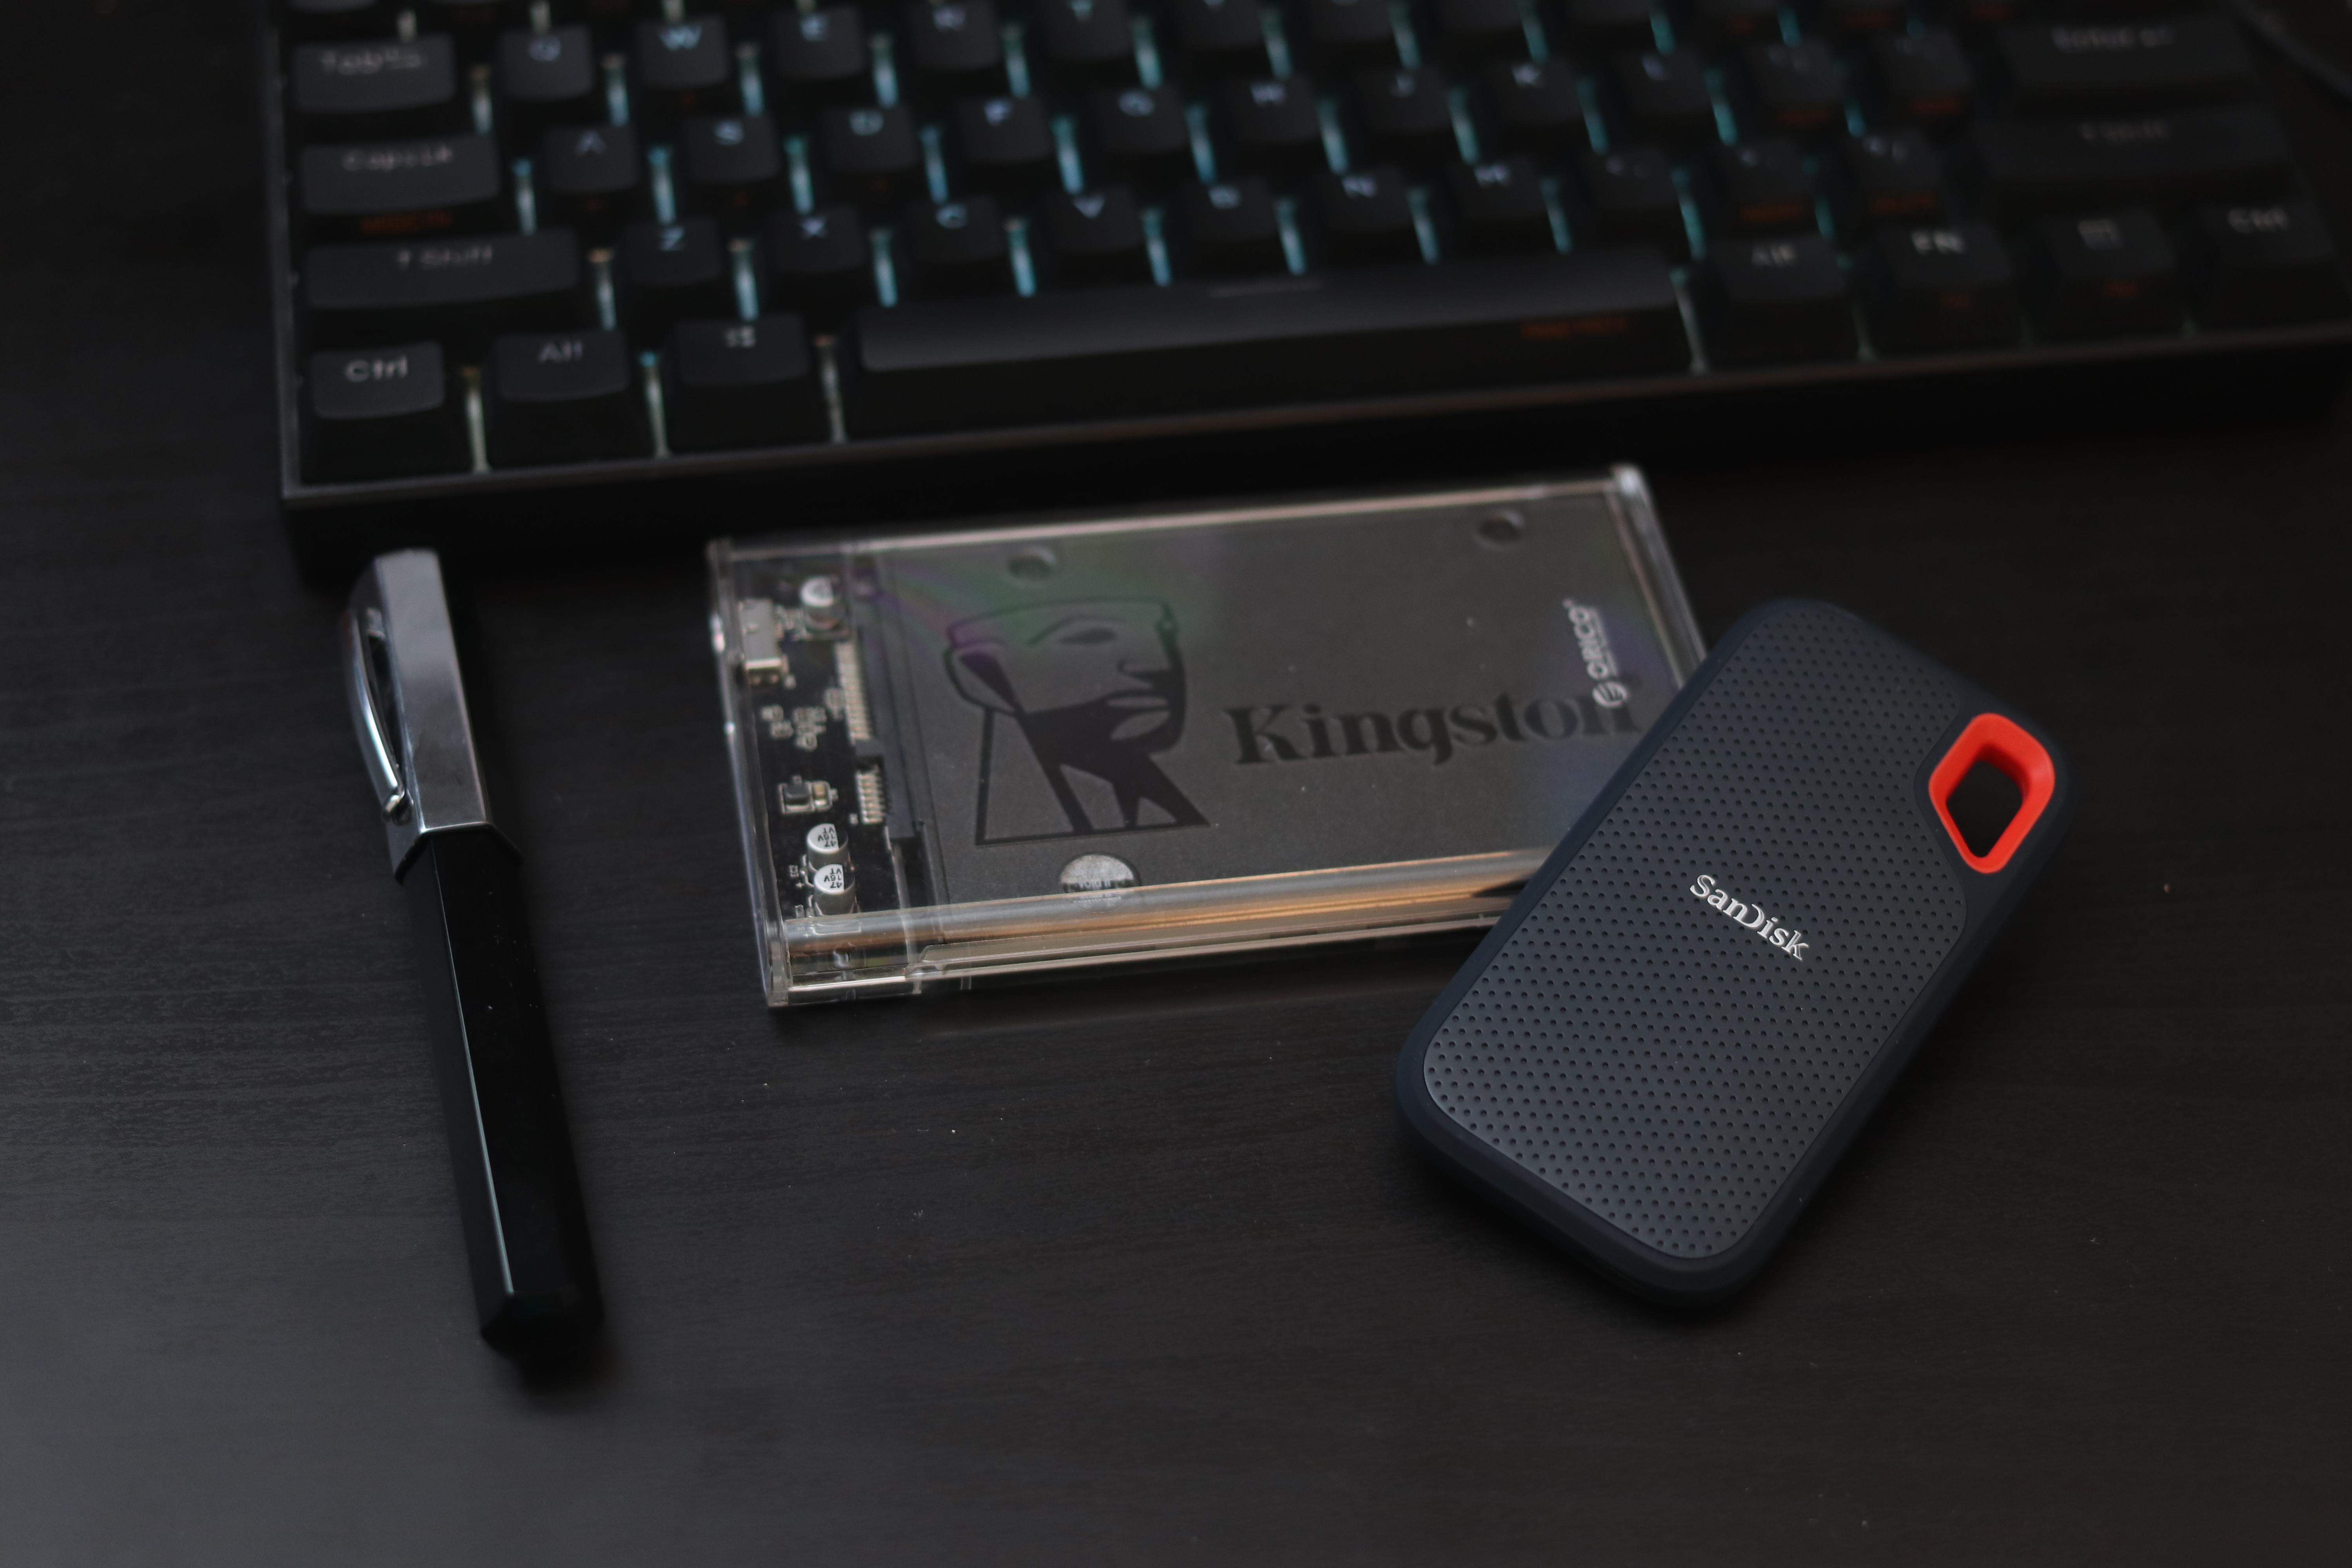 A Kingston SSD drive in a see-through 2.5-inch enclosure, and a smaller Sandisk SSD laying on top of it.